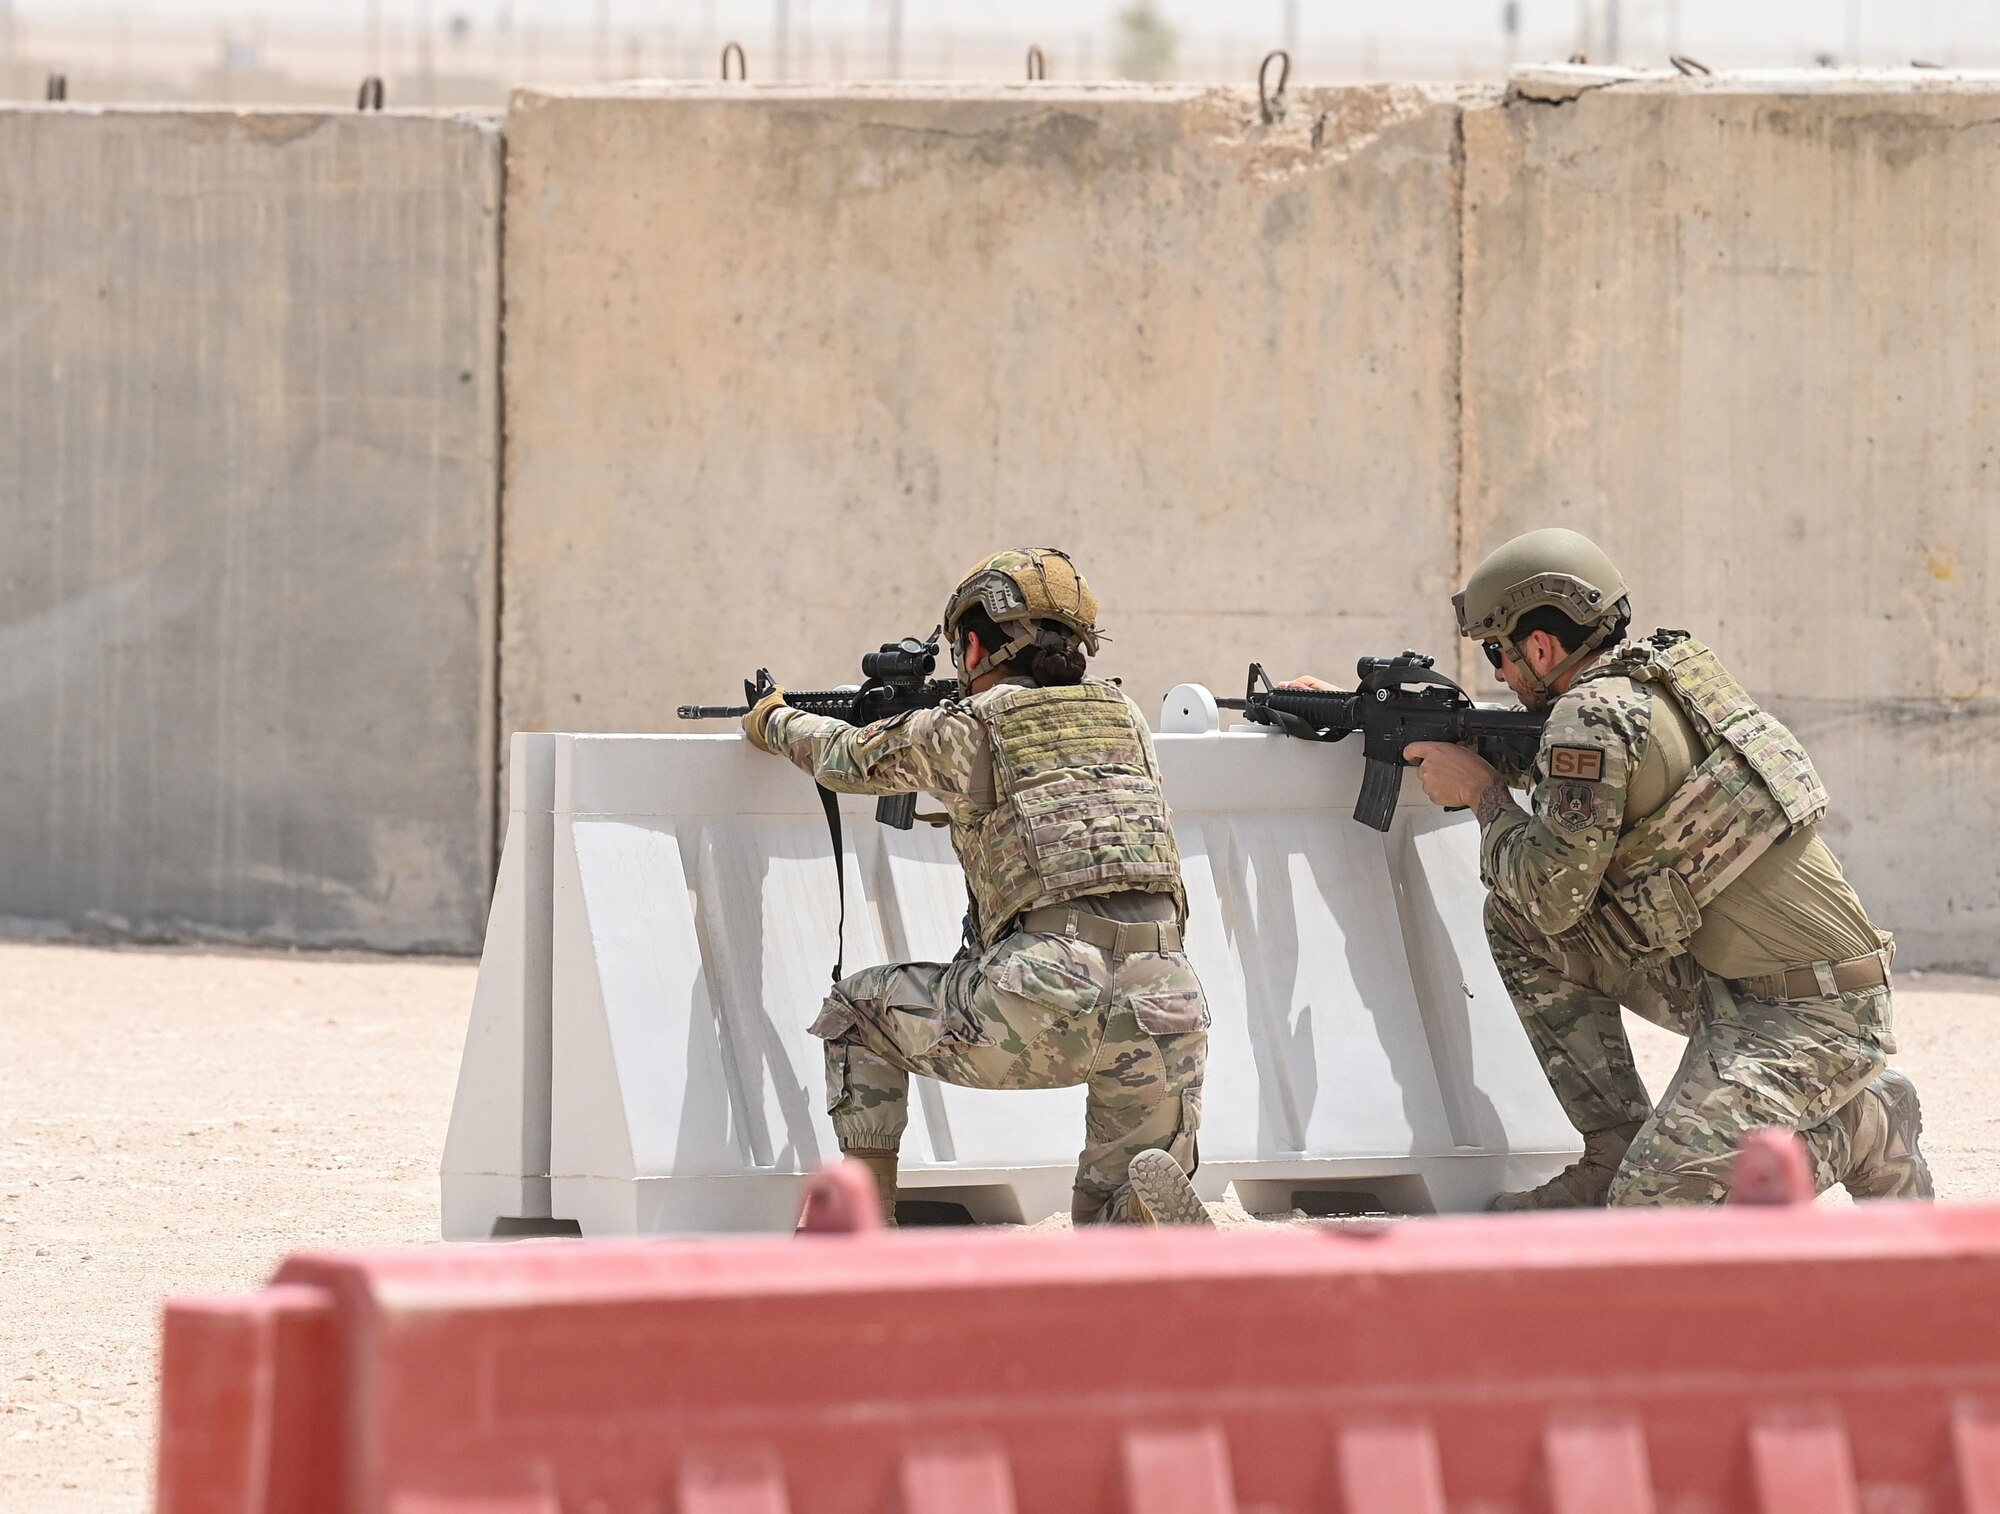 A pair of 379th Expeditionary Security Forces Squadron defenders lay down fire from behind a barricade during a shoot, move and communicate demonstration July 1, 2022 at Al Udeid Air Base, Qatar. The Defenders along with other 379th EMSG airmen showcased how to advance on a target while maintaining fire and communication. (U.S. Air National Guard photo by Tech. Sgt. Michael J. Kelly)